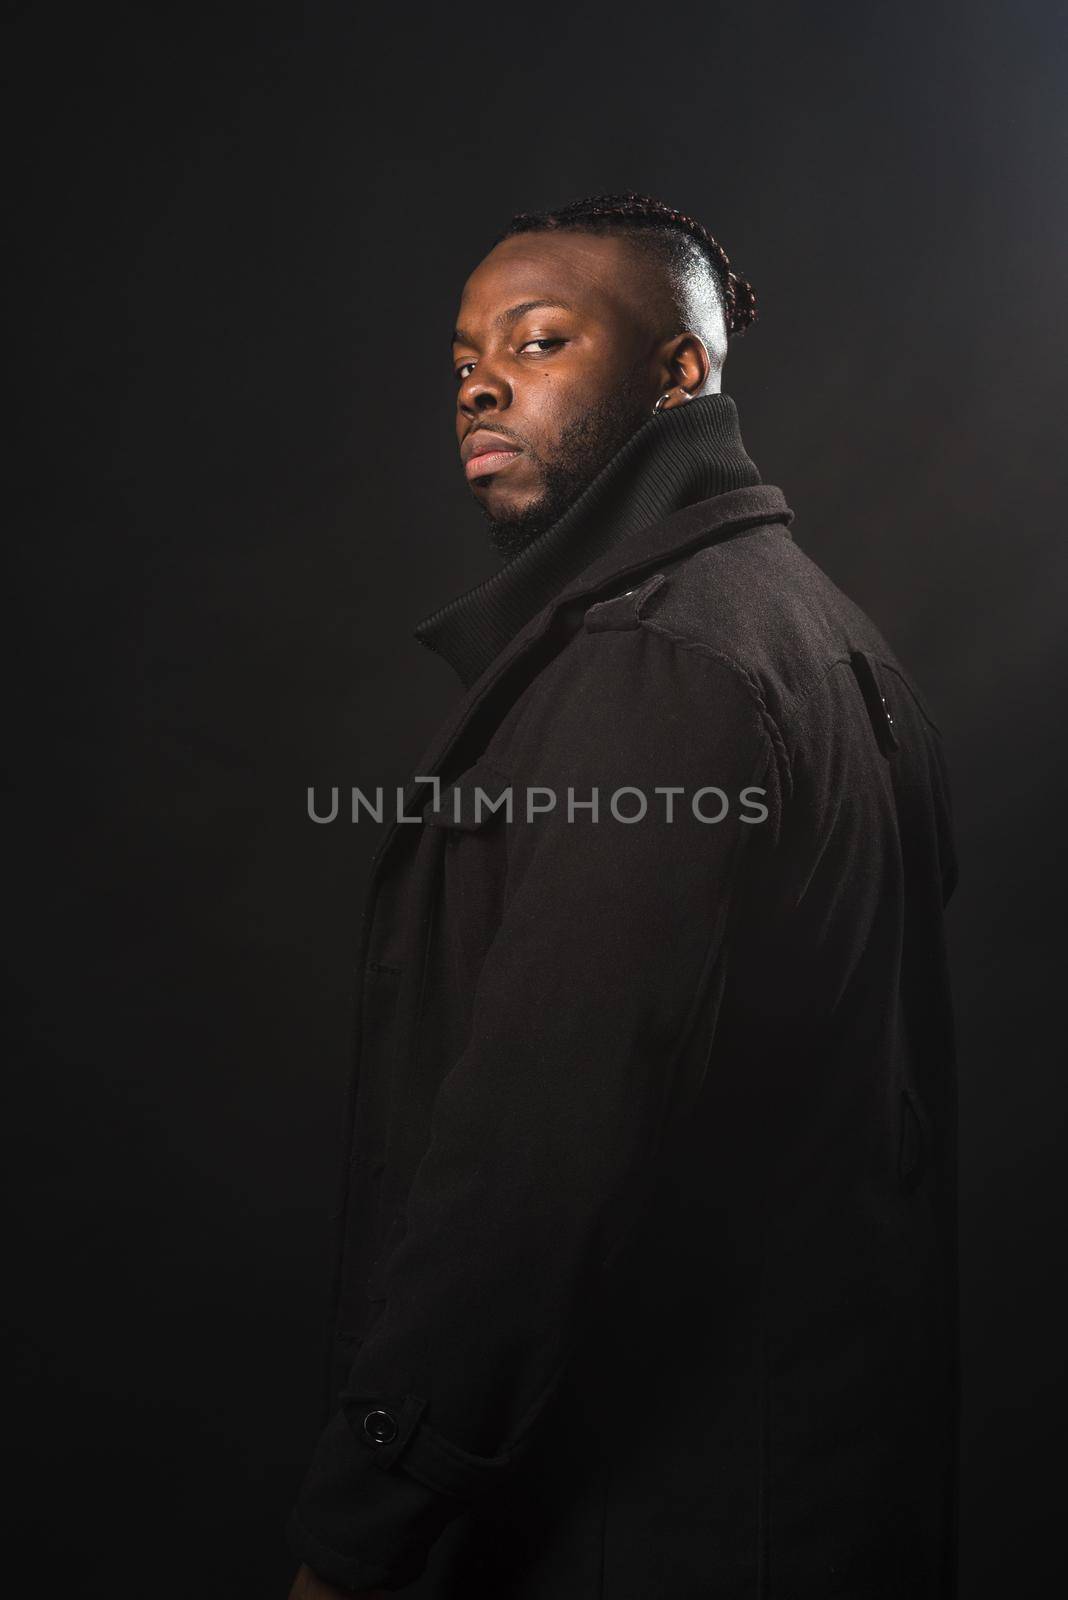 Black man from behind looking at camera. Black background by ivanmoreno